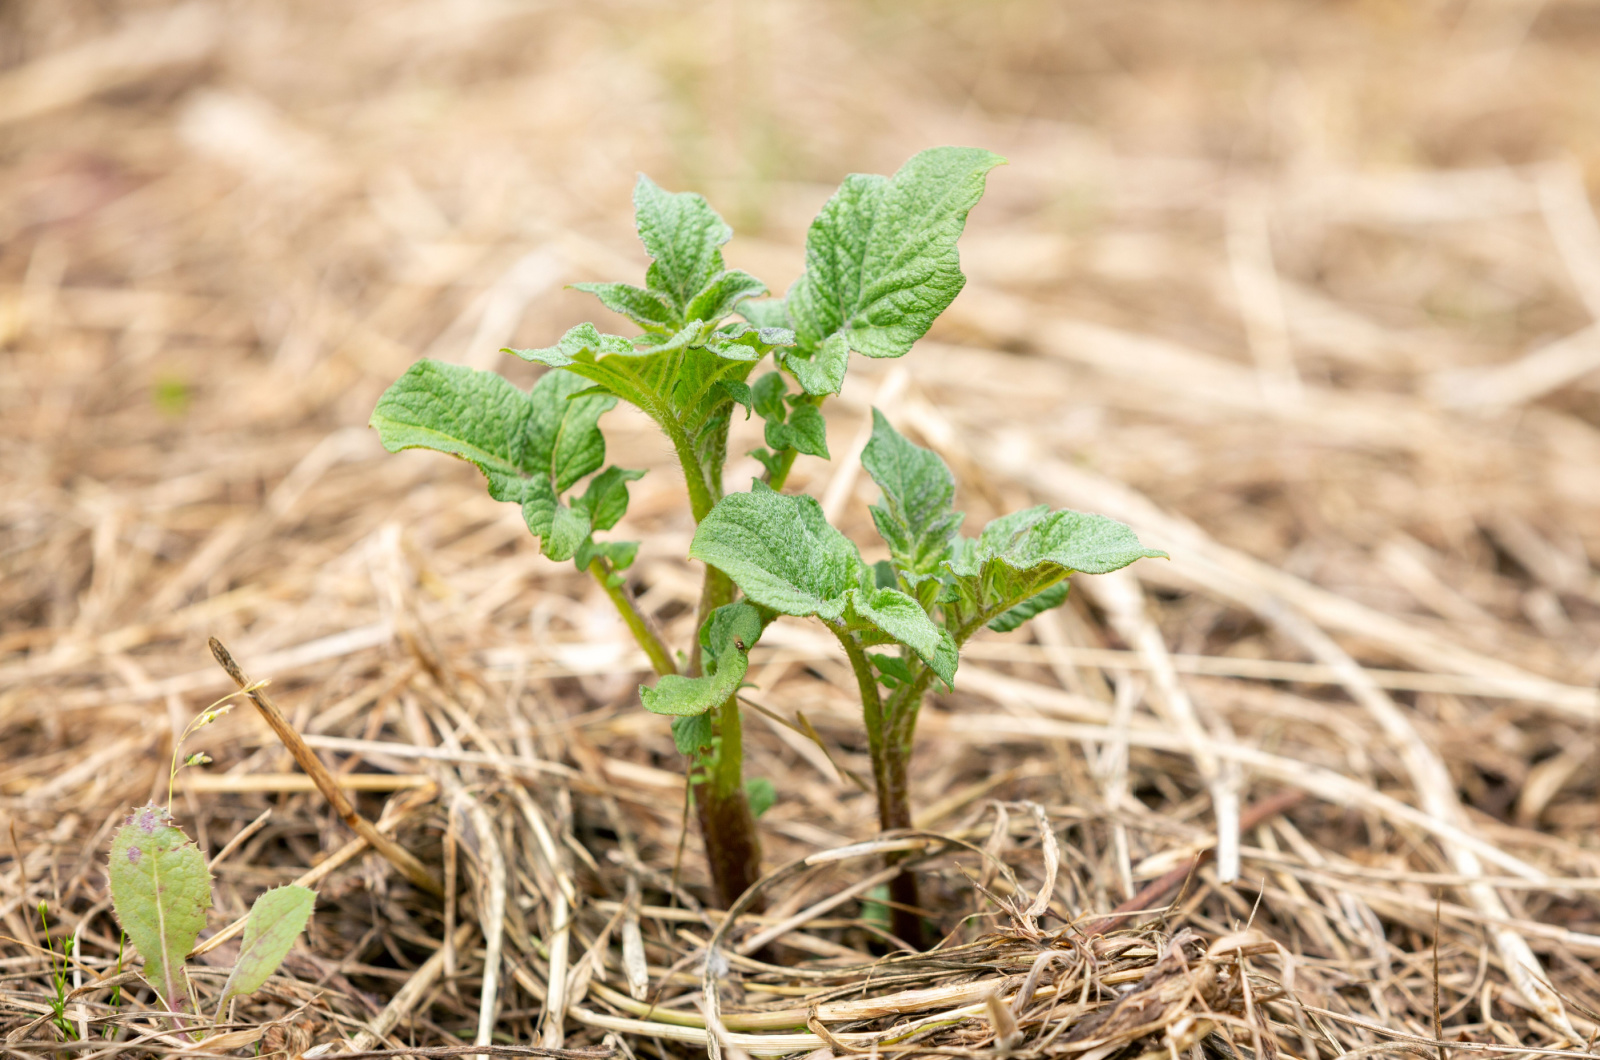 side view of young potato sprouts growing in a mulch bedding of straw